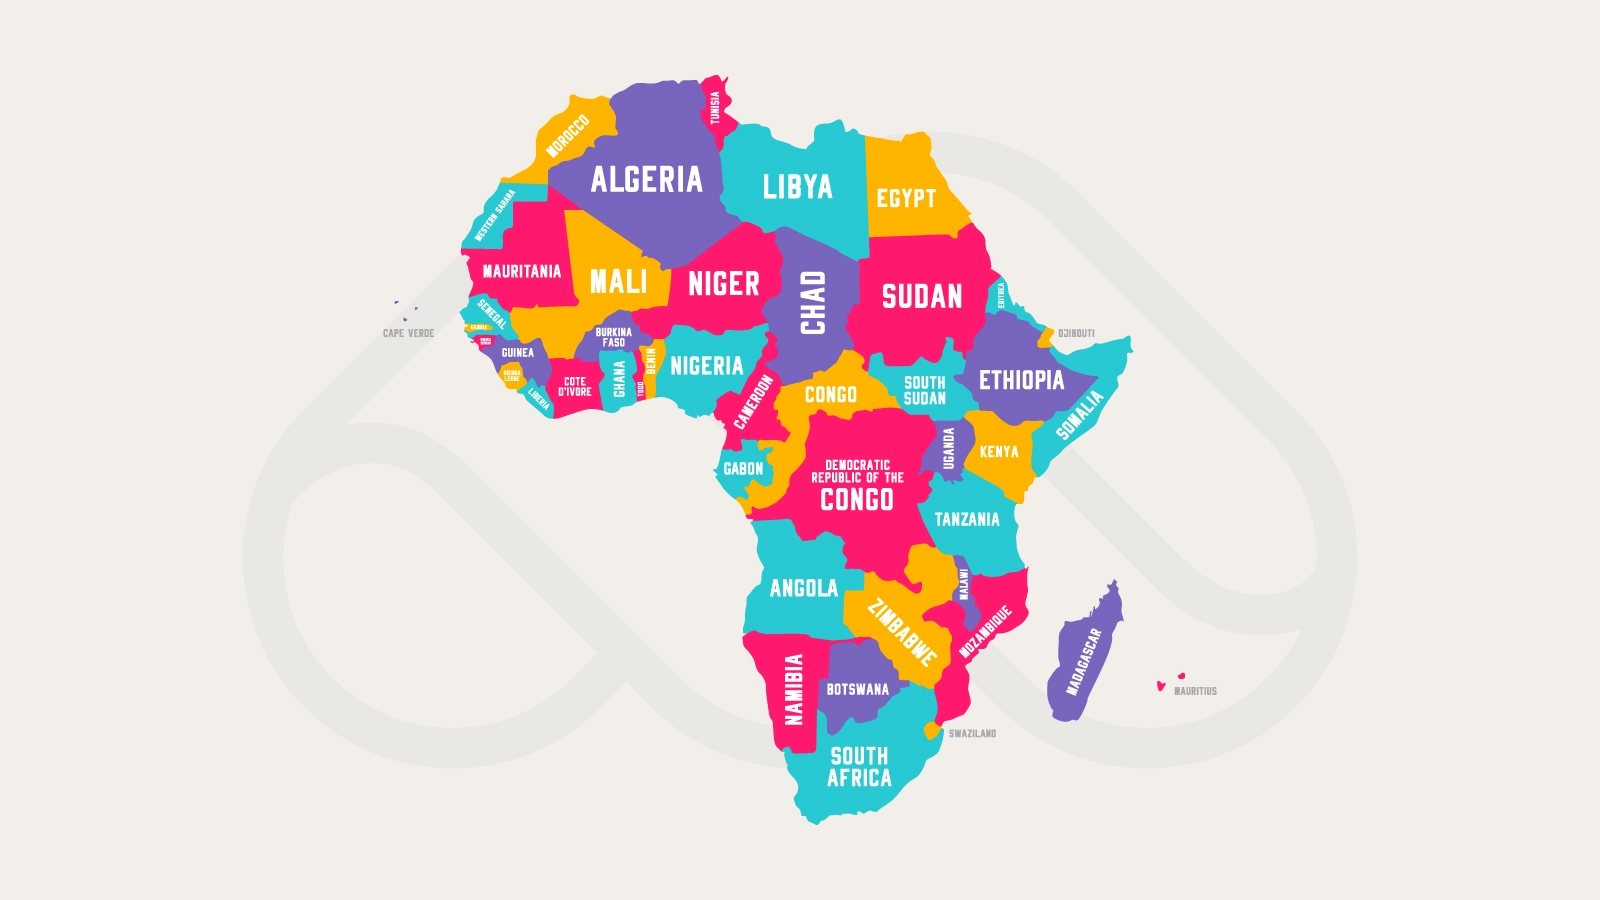 African Countries